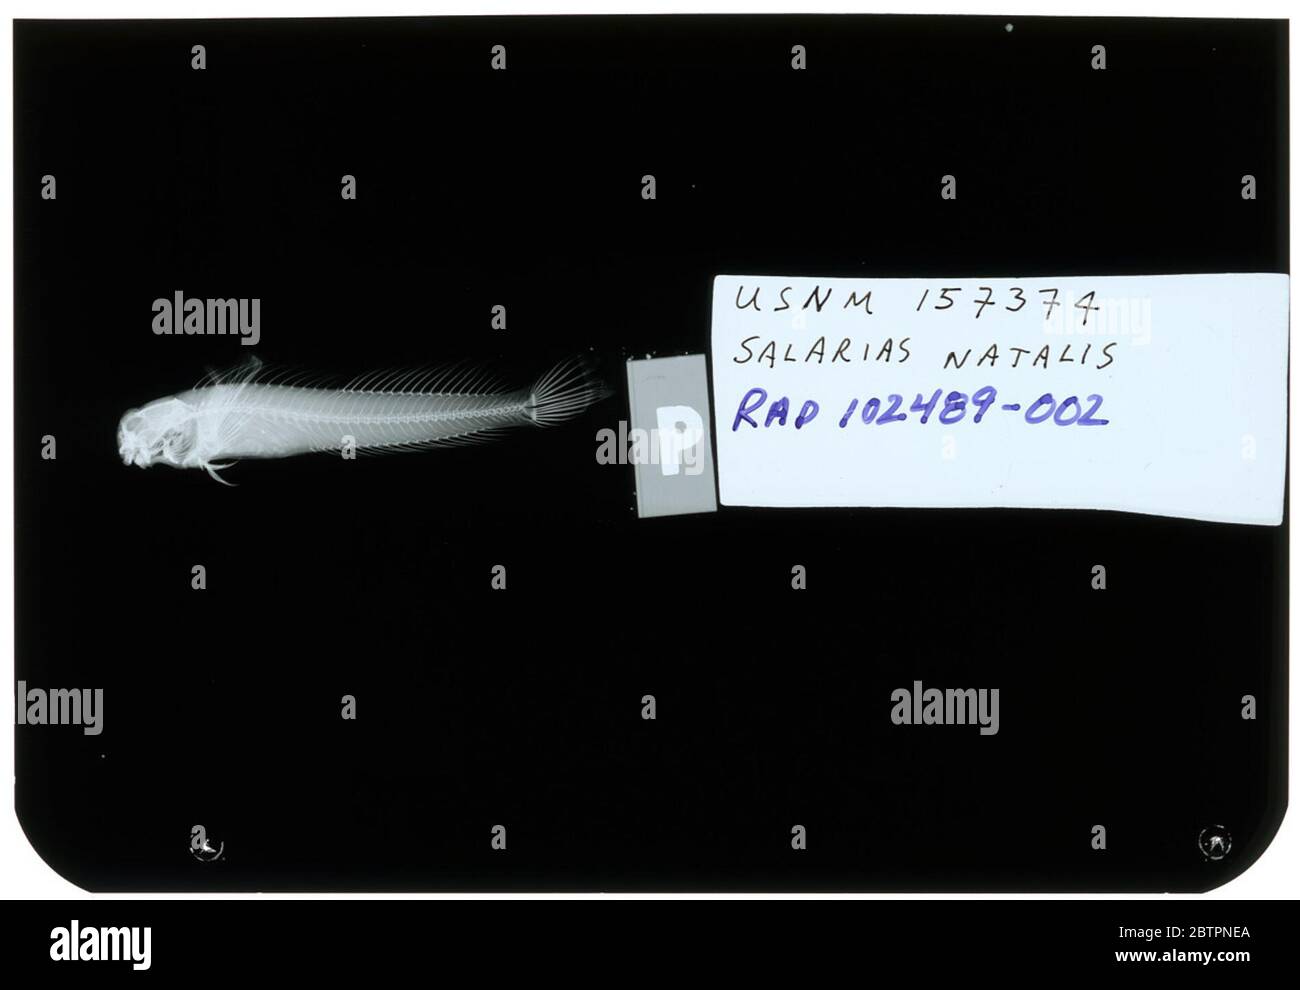 Salarias natalis Regan. Radiograph is of a syntype; The Smithsonian NMNH Division of Fishes uses the convention of maintaining the original species name for type specimens designated at the time of description. The currently accepted name for this species is Praealticus natalis.24 Oct 20182 Stock Photo